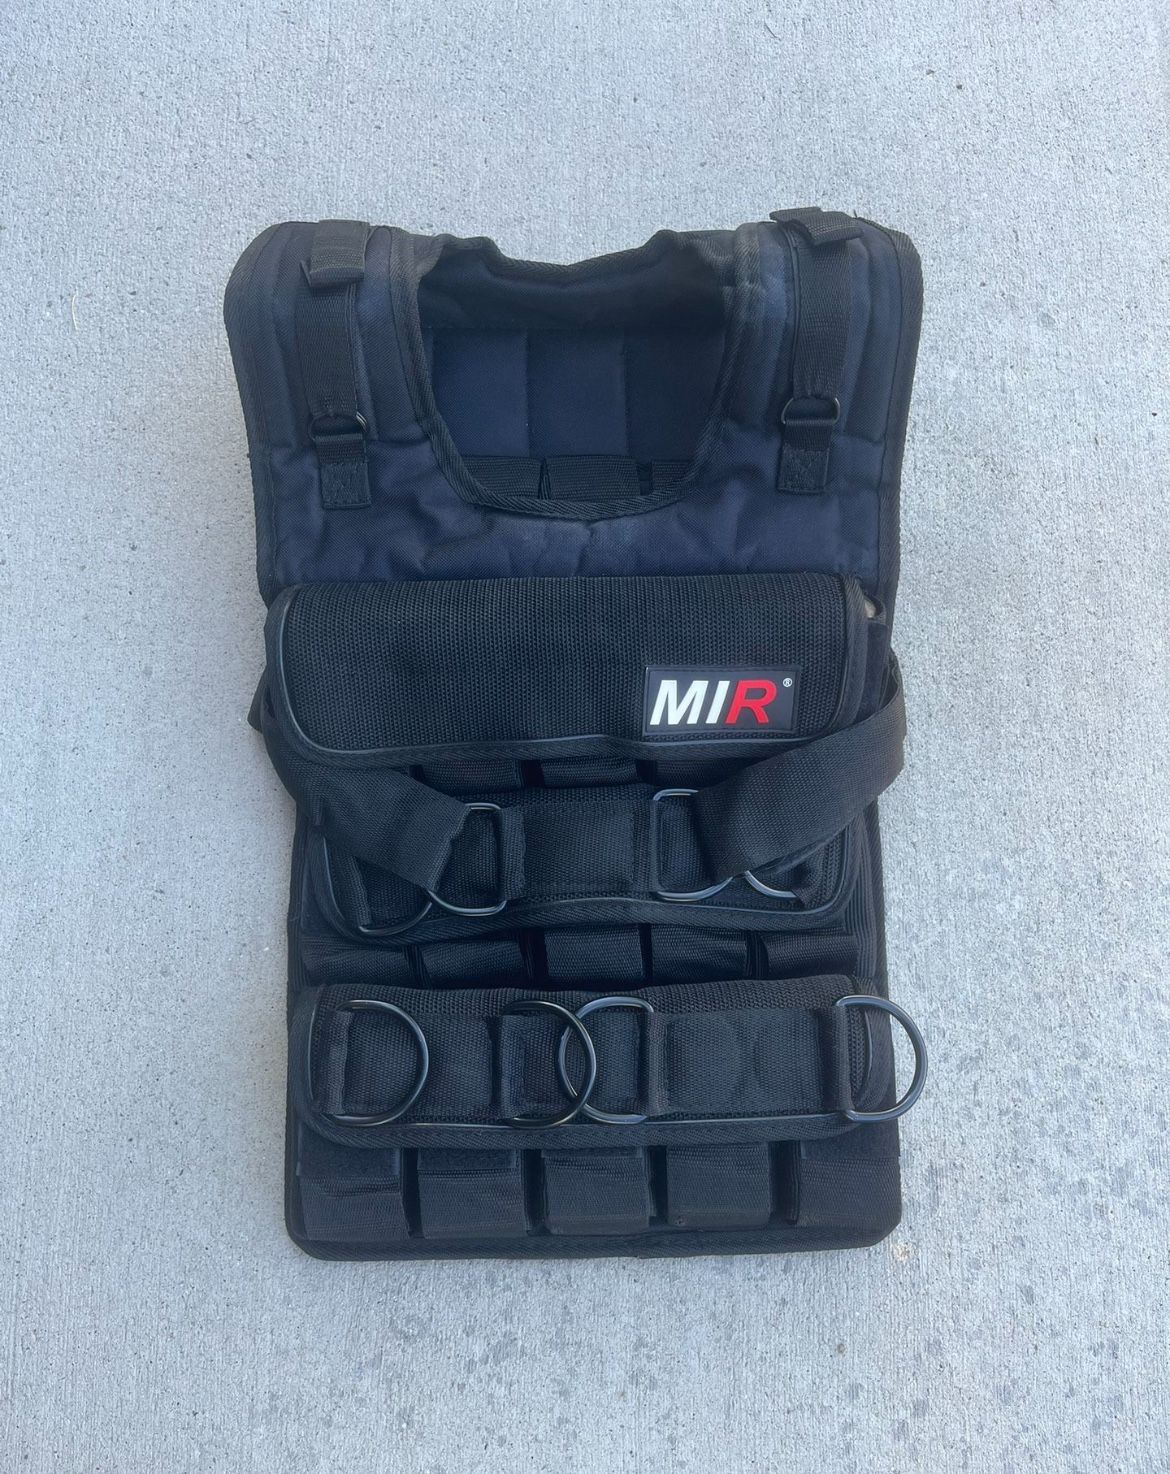 MIR Pro Weighted Vest, 45 Pounds 